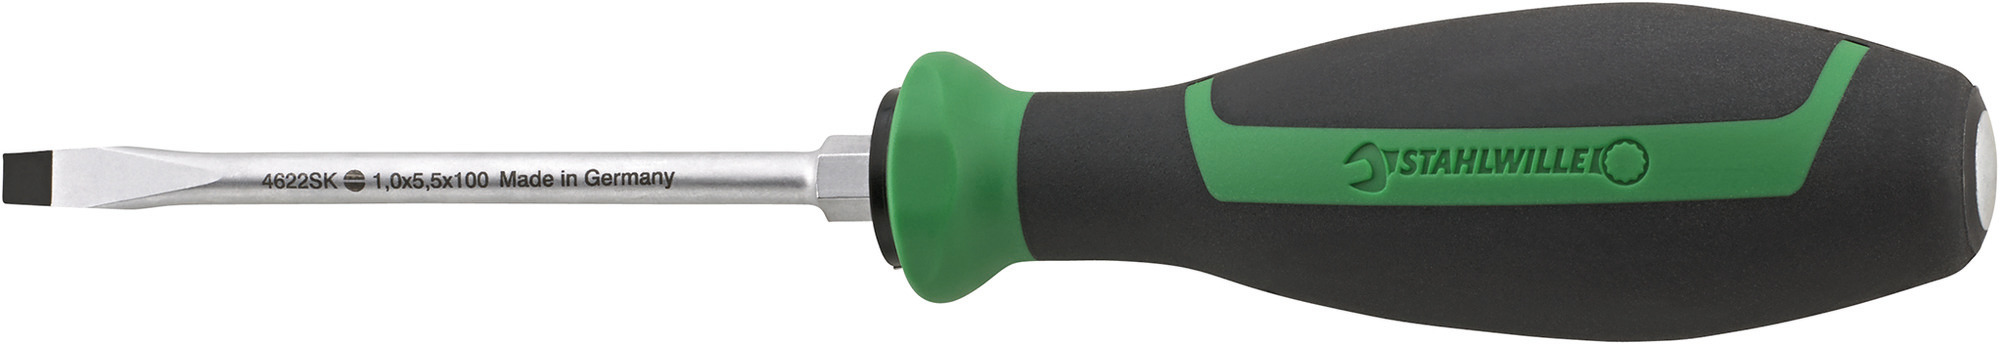 Screwdrivers for Slotted Screws | DRALL 4622SK